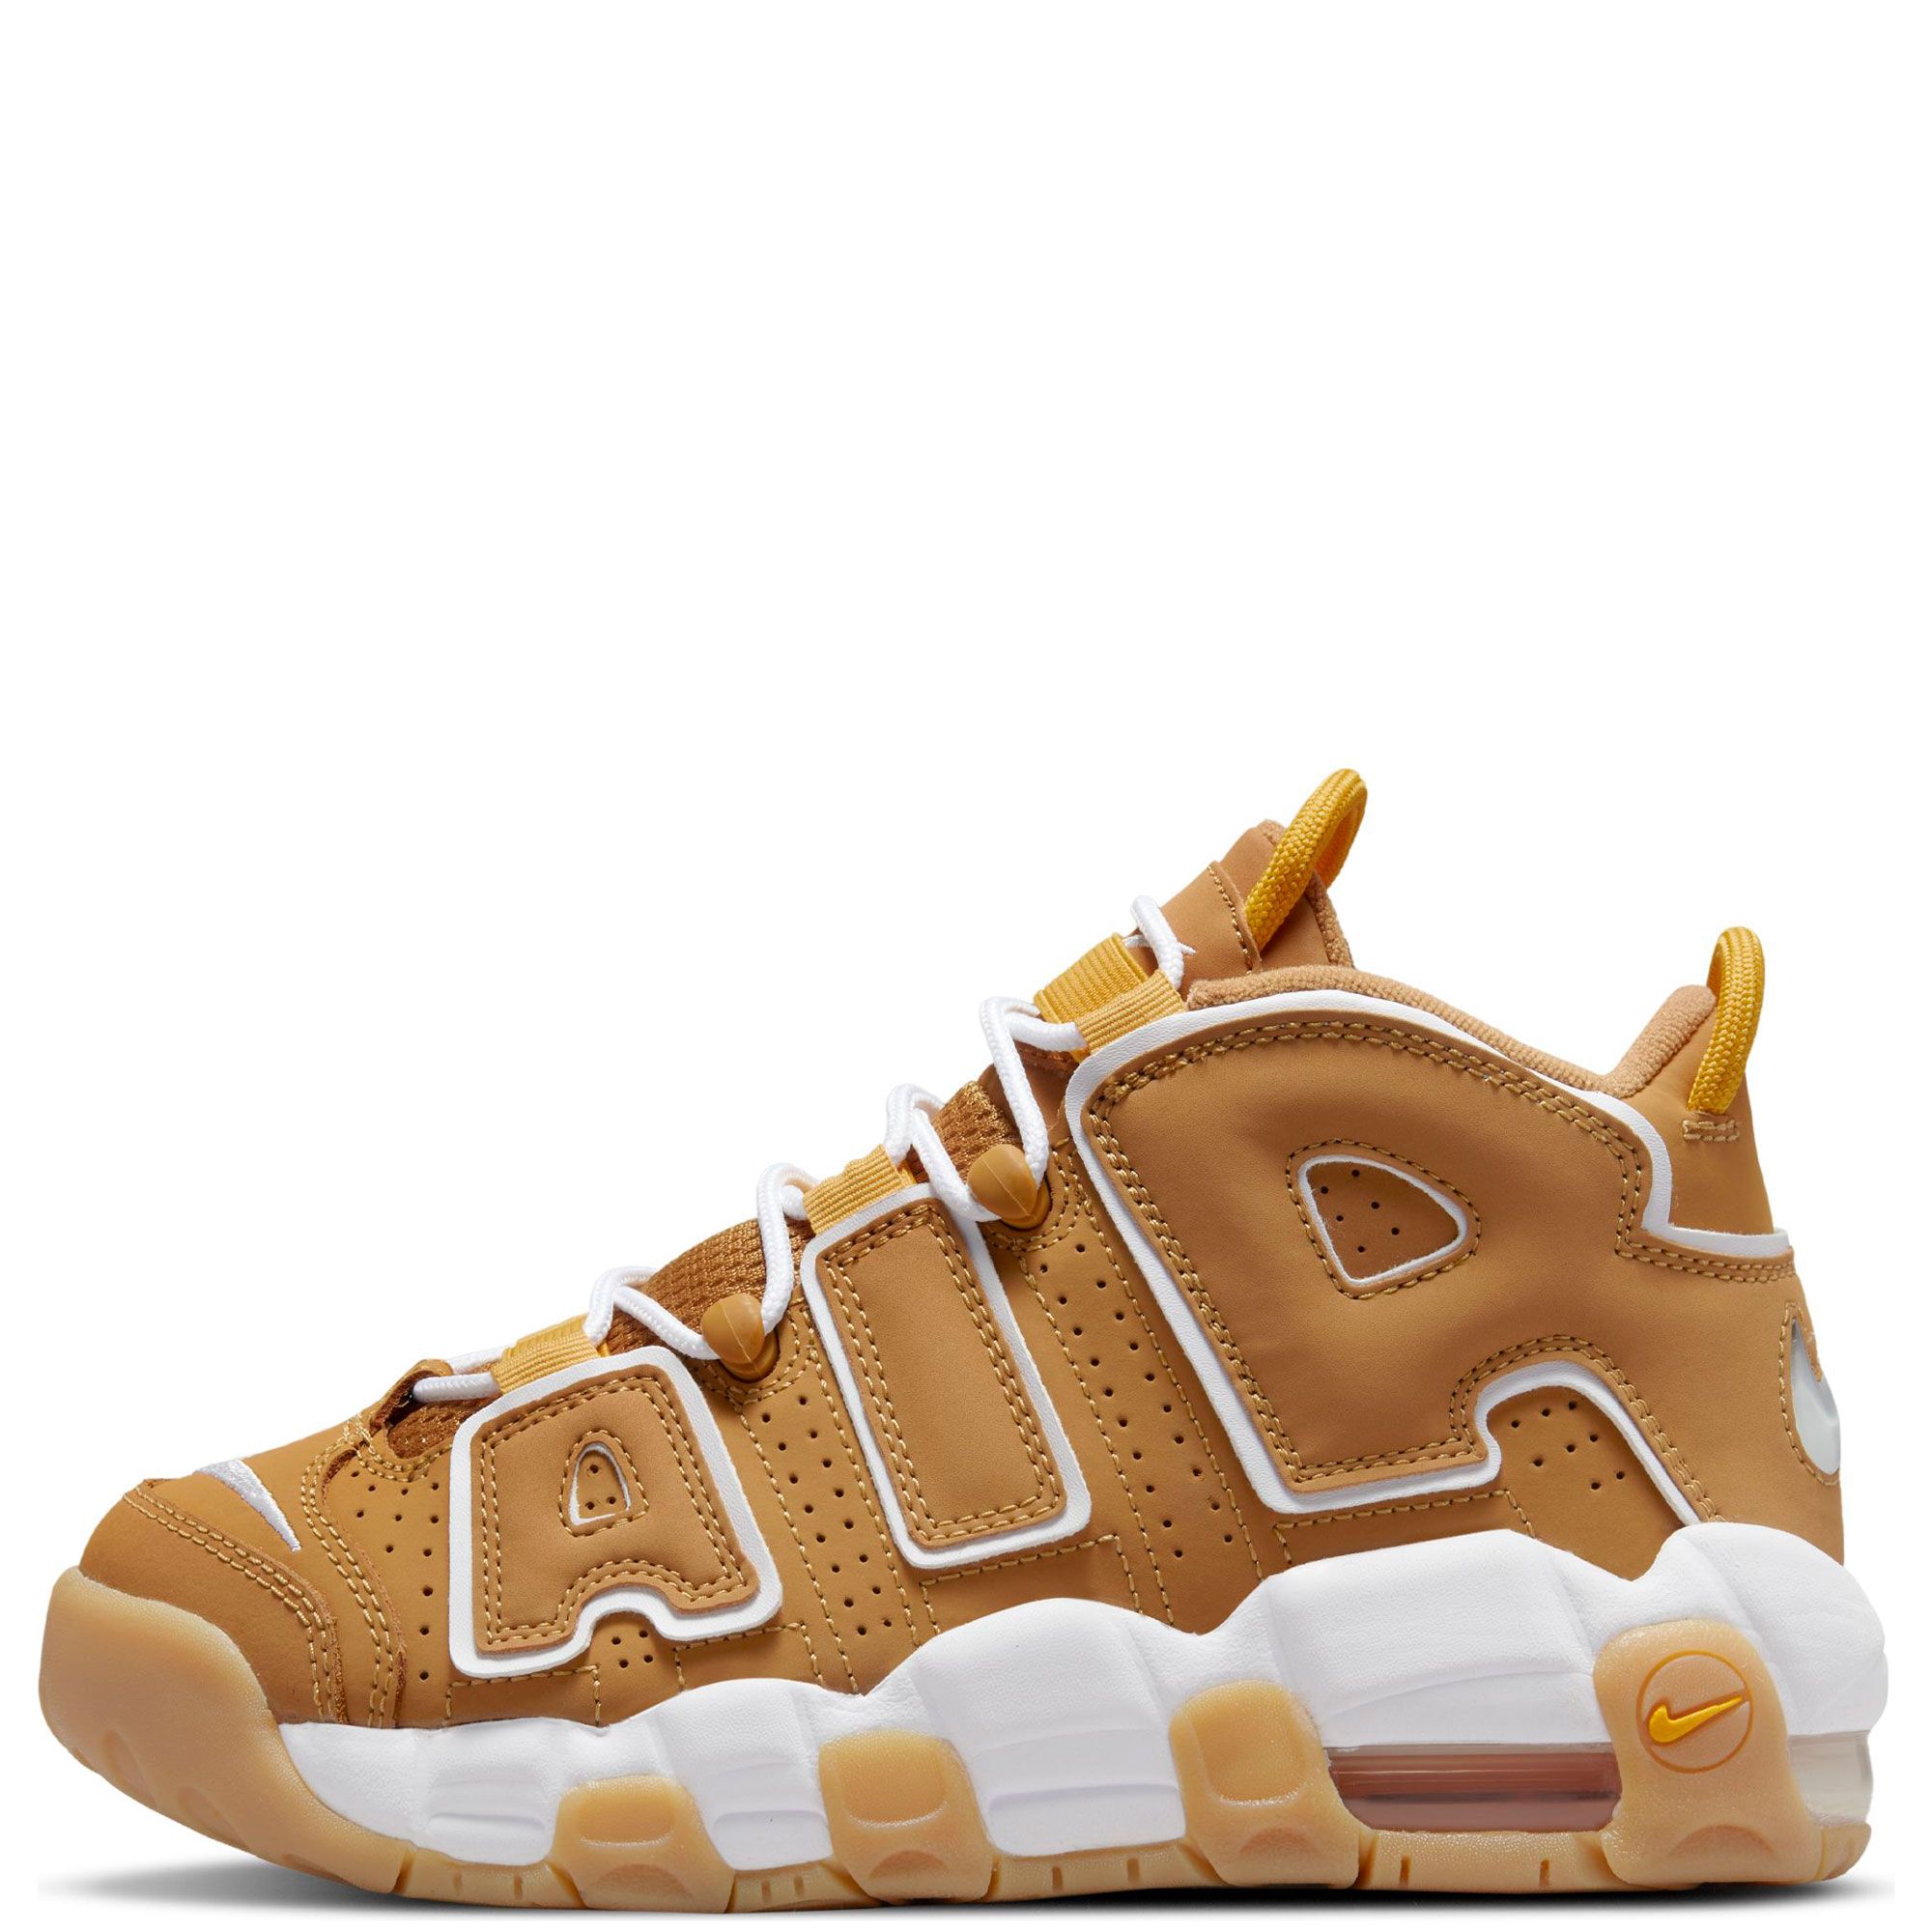 A Brief History of the Nike Air More Uptempo